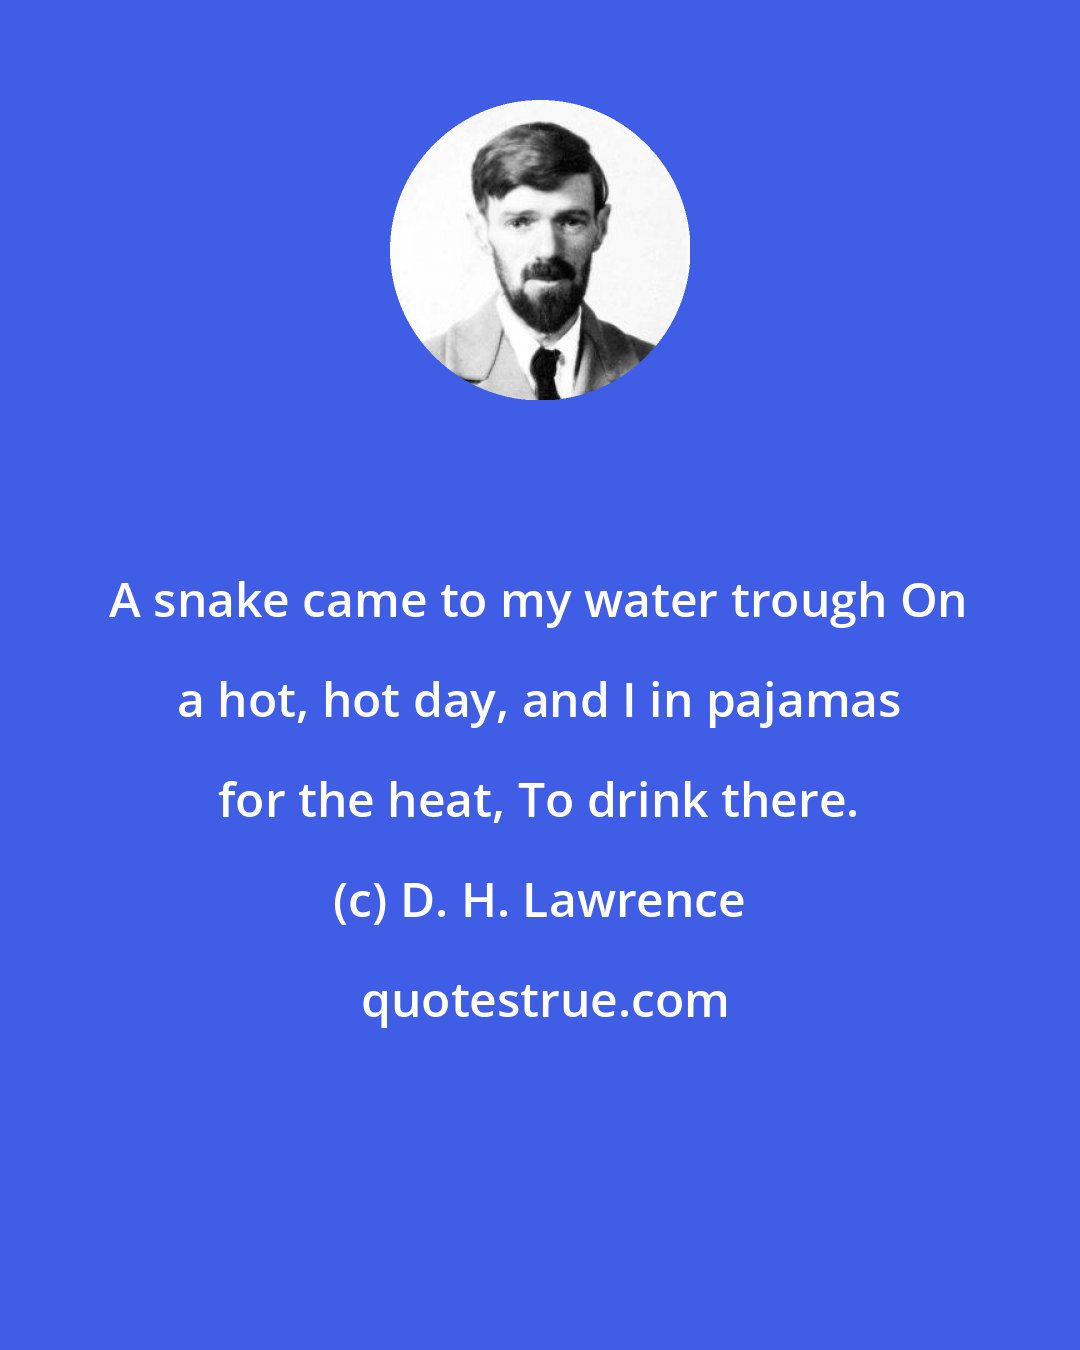 D. H. Lawrence: A snake came to my water trough On a hot, hot day, and I in pajamas for the heat, To drink there.